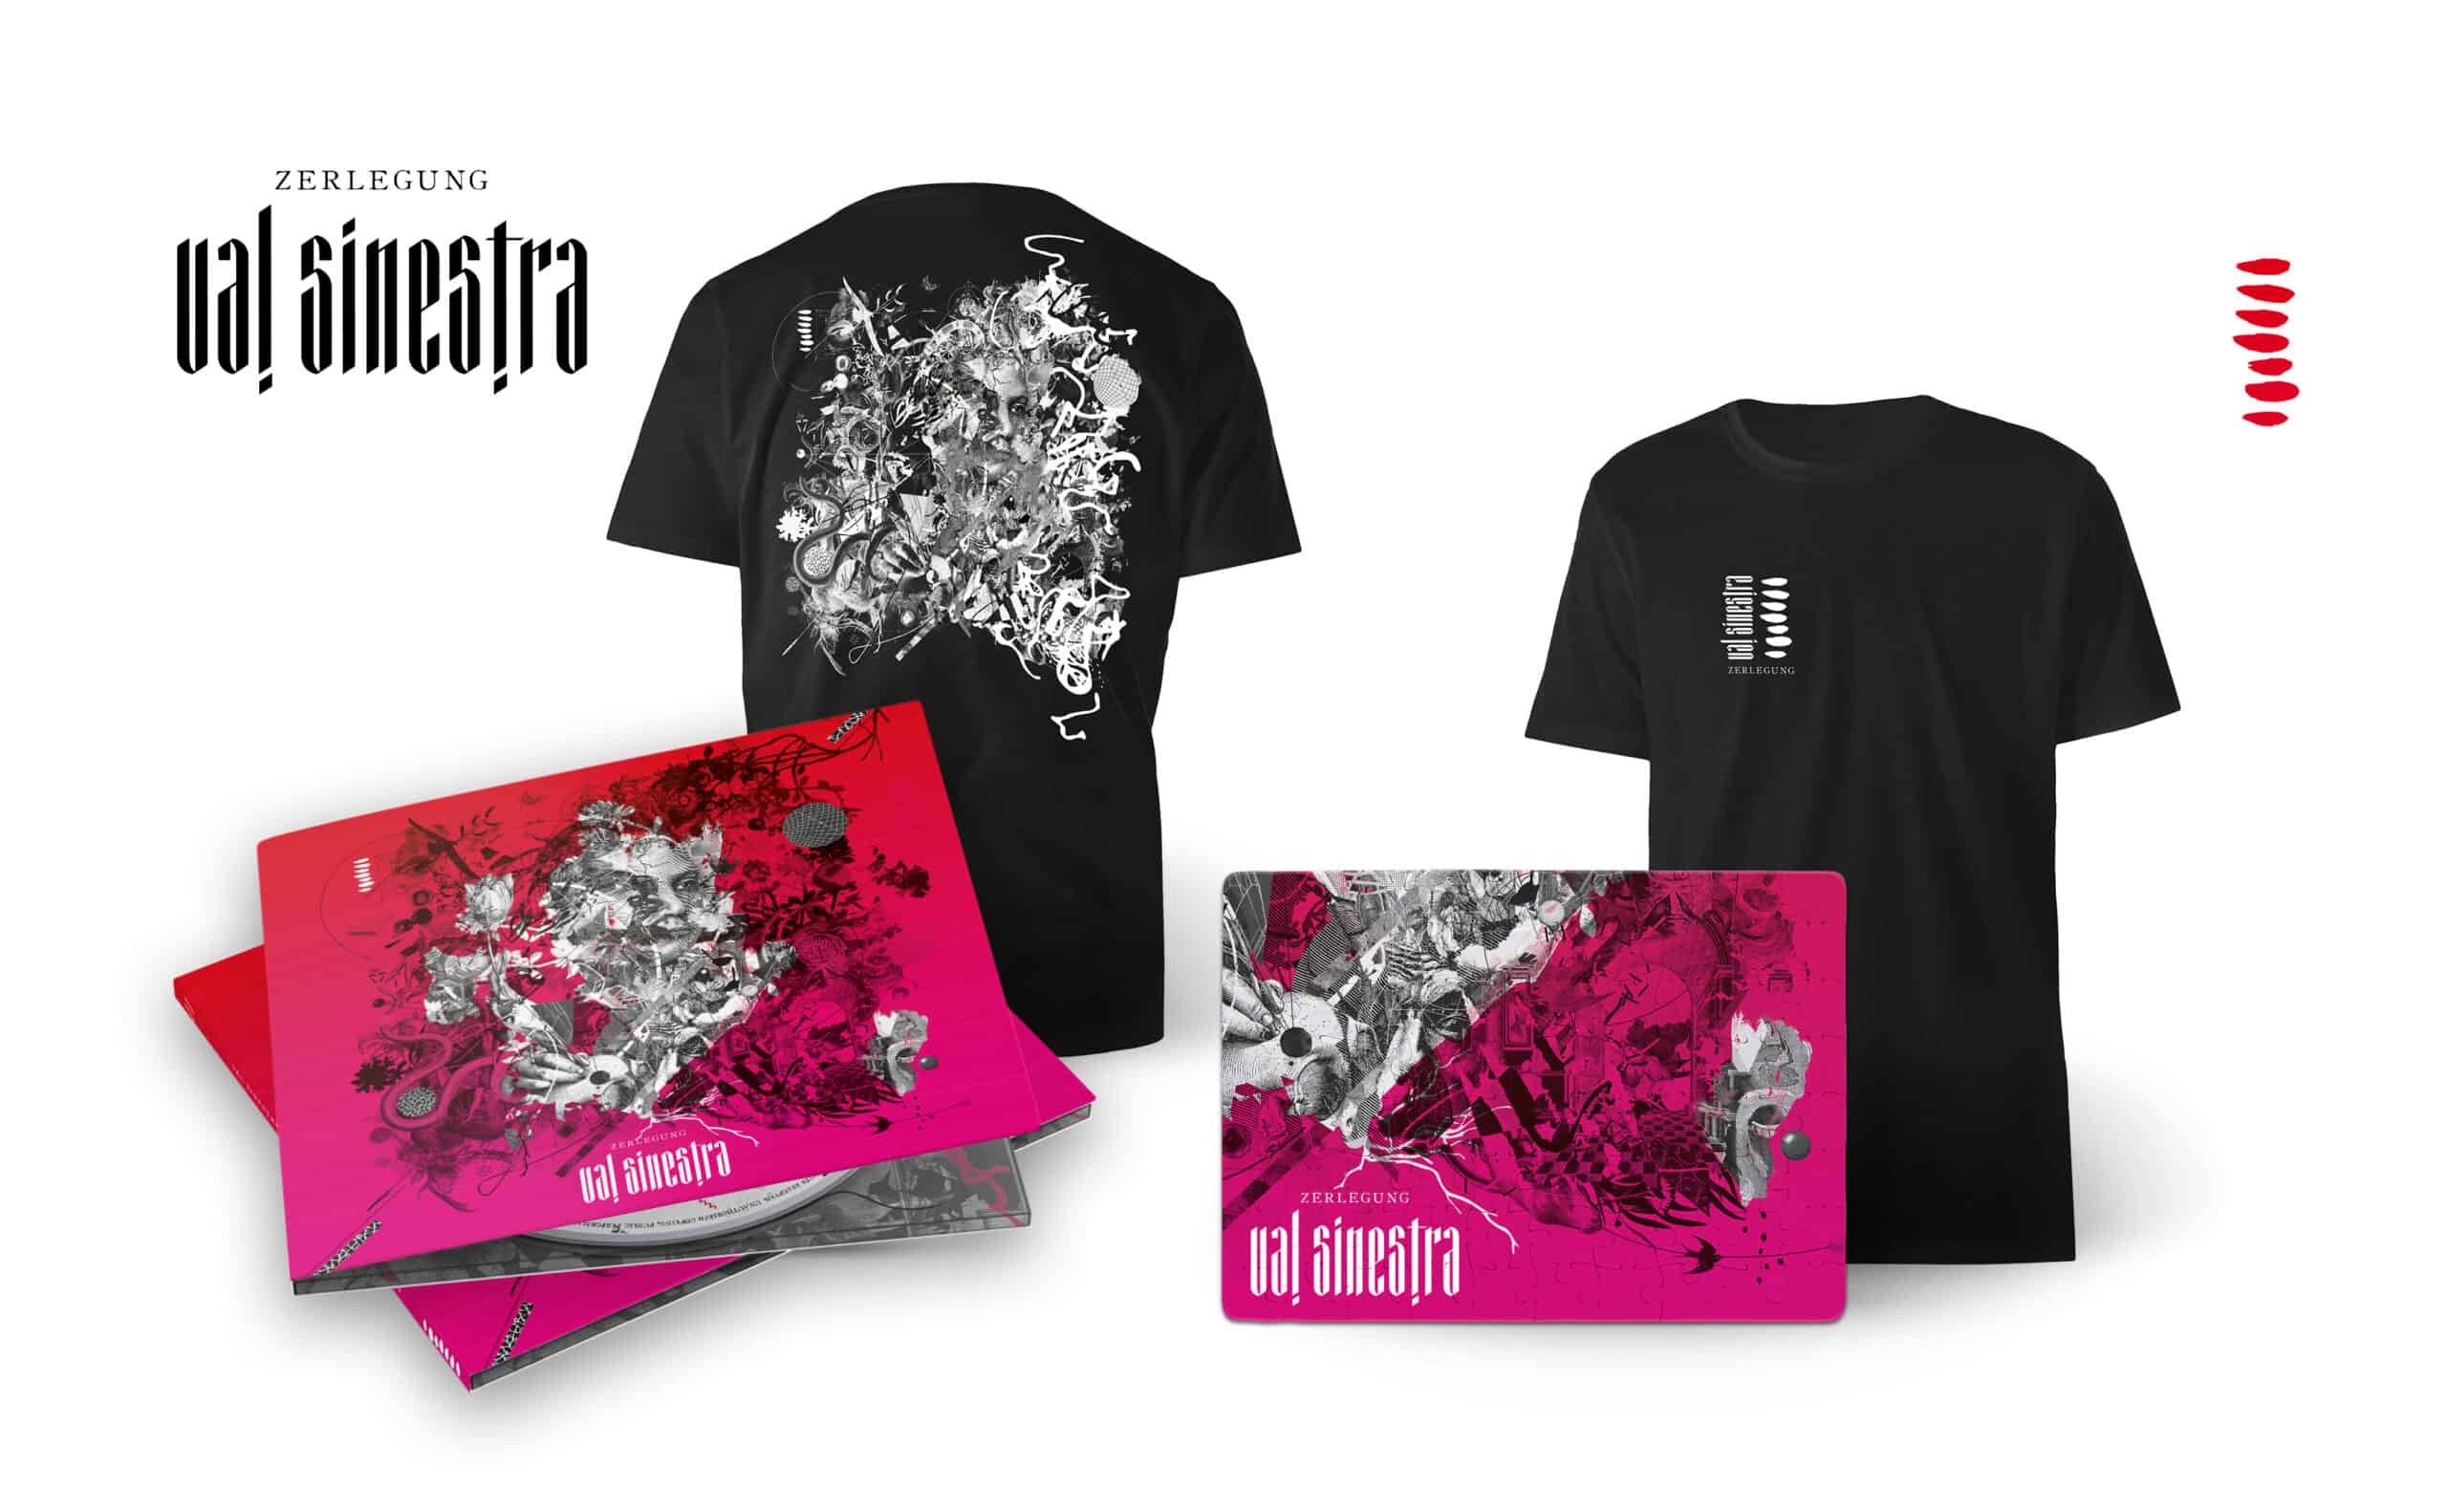 Val Sinestra - Zerlegung col.LP/CD *Preorder Shirt Bundles available incl. CD or ltd. LP plus a jigsaw puzzle! *limited Mailorder Version: 100 copies clear black white splatter! LP comes also with a jigsaw-puzzle! *regular Vinyl Edition: 400 copies white wax *CD Digipack / choose between puzzle-version or only CD